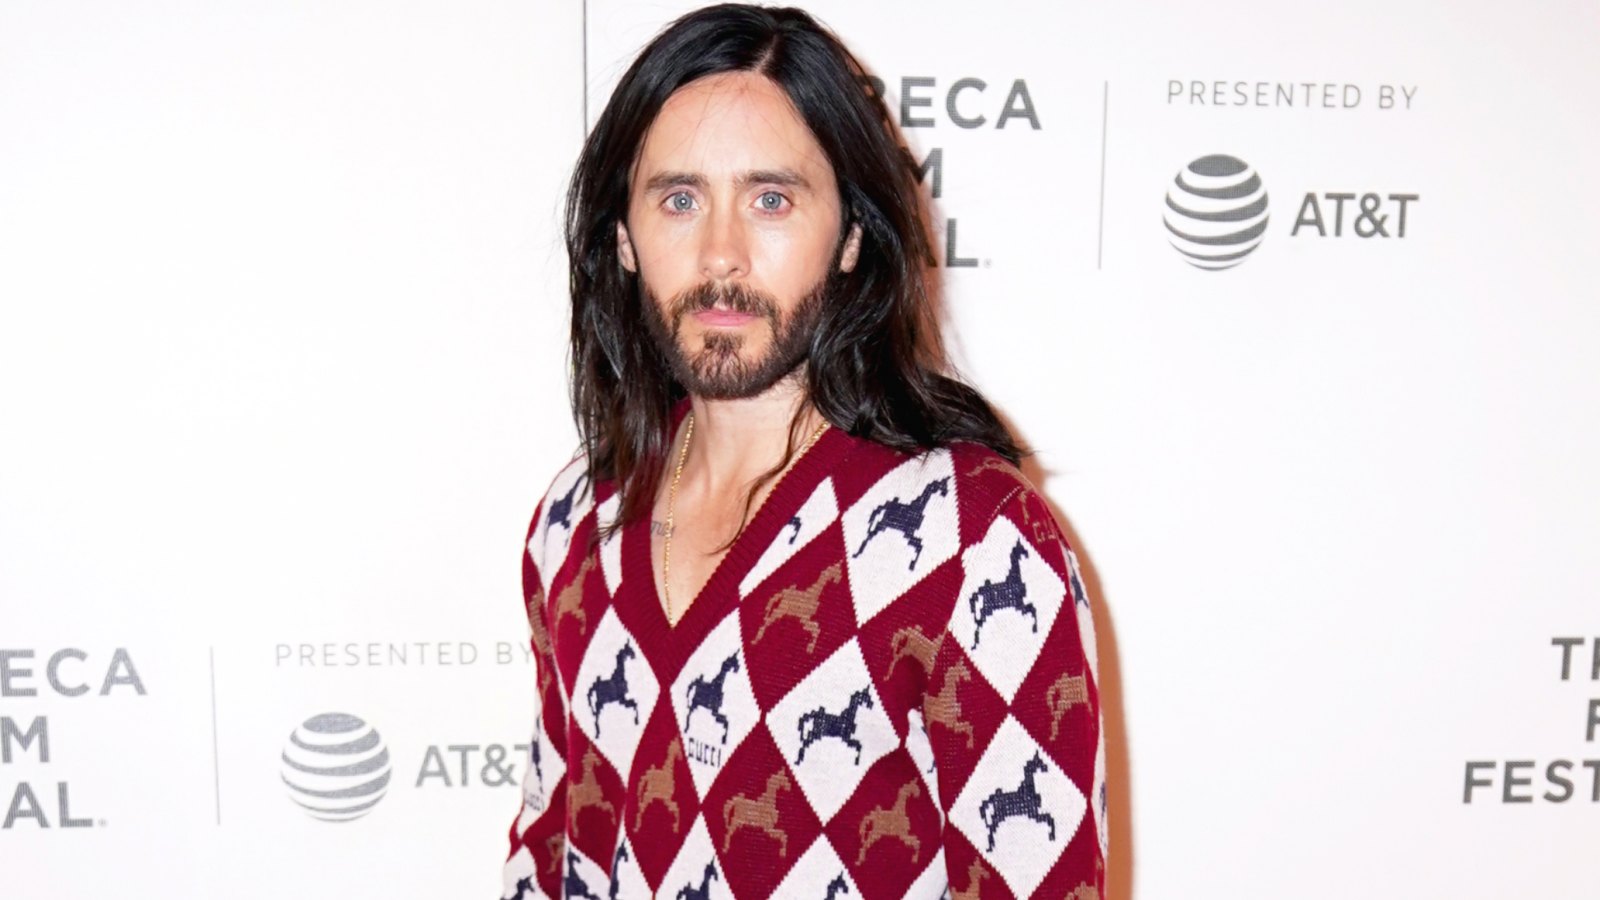 Jared Leto Recalls the Day He ‘Nearly Died’ While Rock Climbing